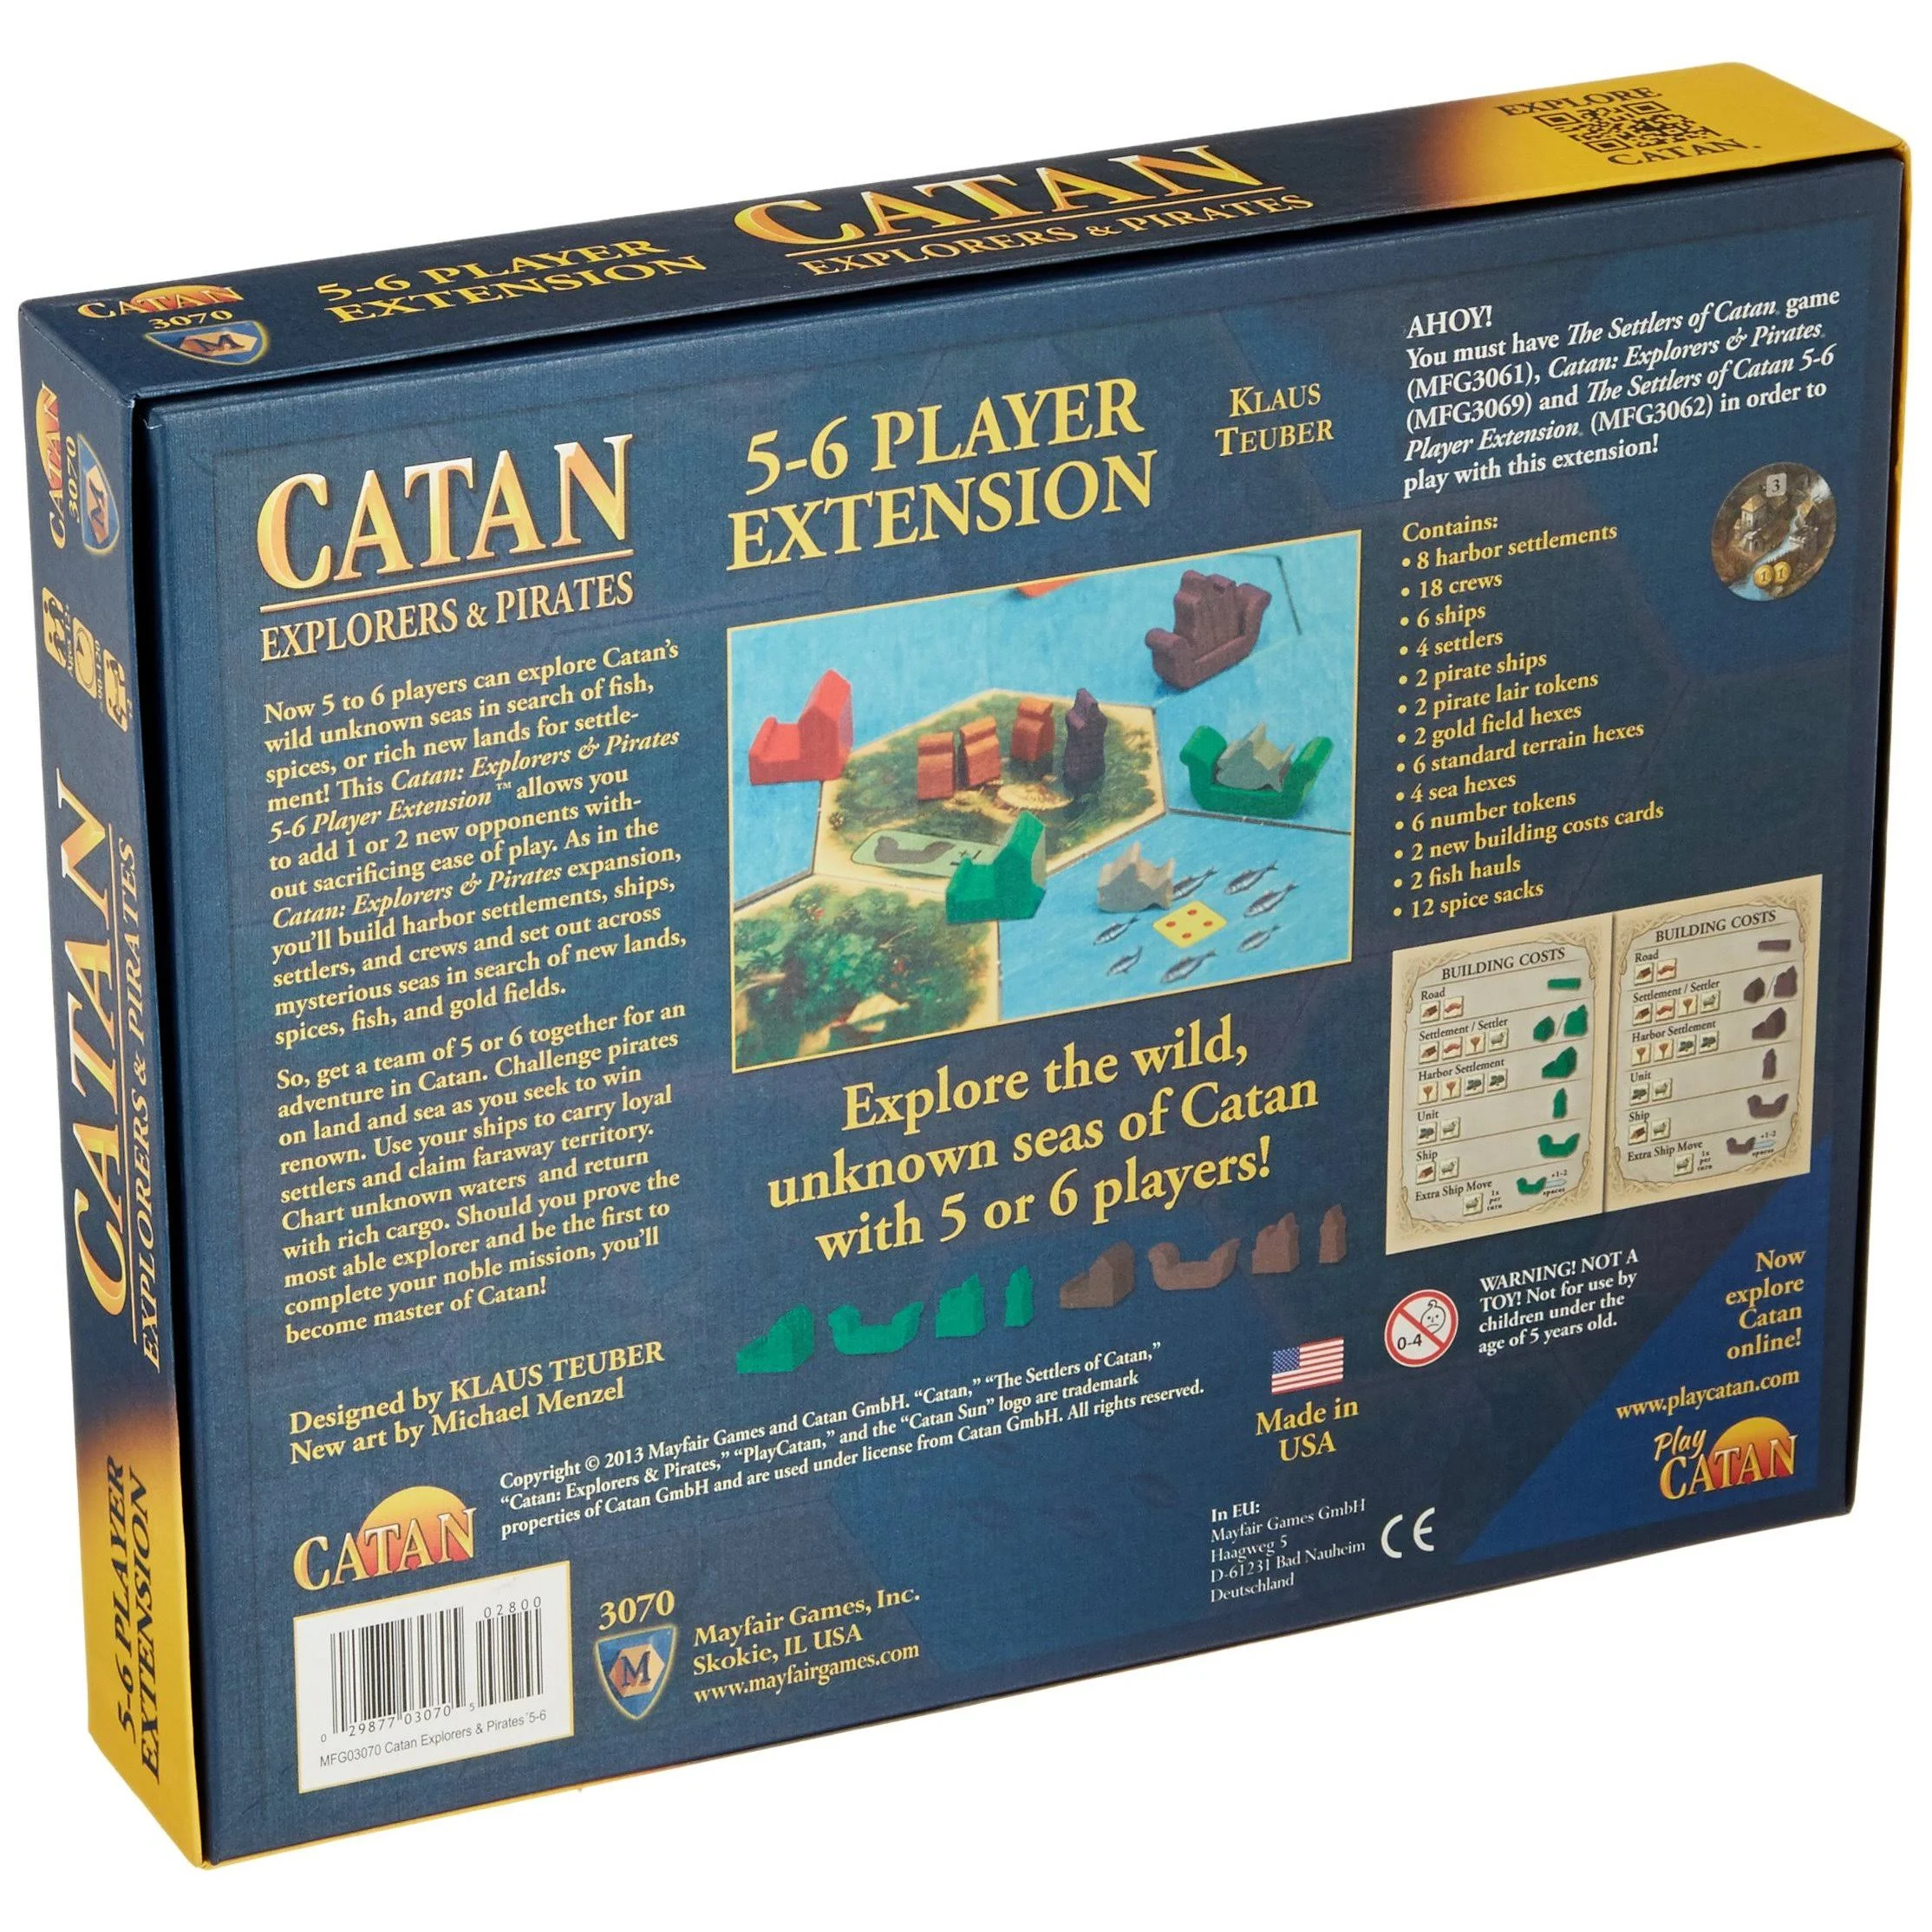 Massively Fun sets sail with new fast-paced multi-player Settlers of Catan  game – GeekWire